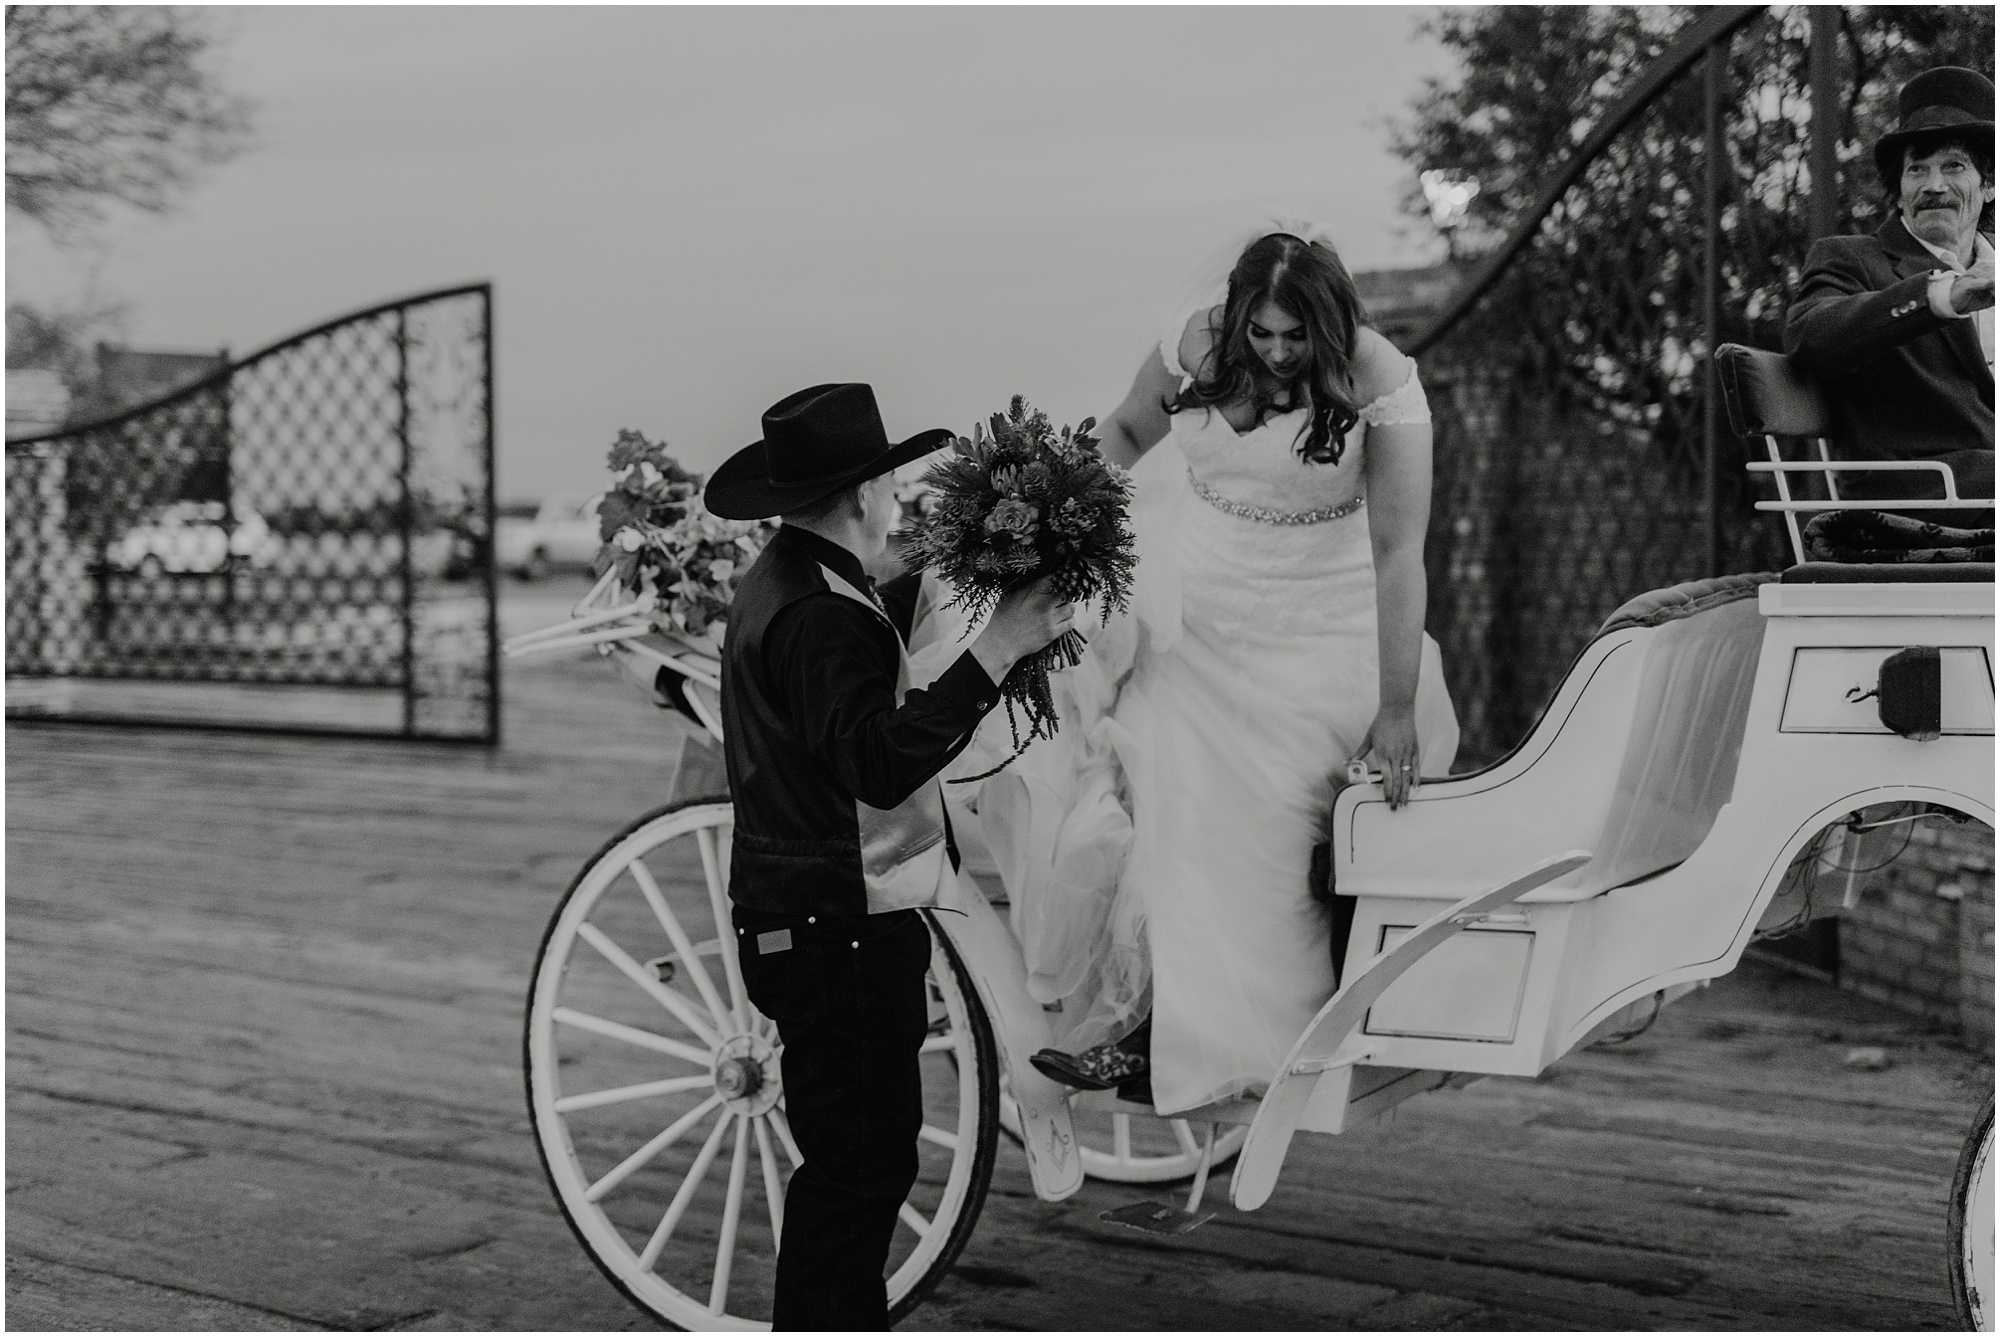 The groom helps his bride out of the horse drawn carriage after their Christmas Country Wedding.